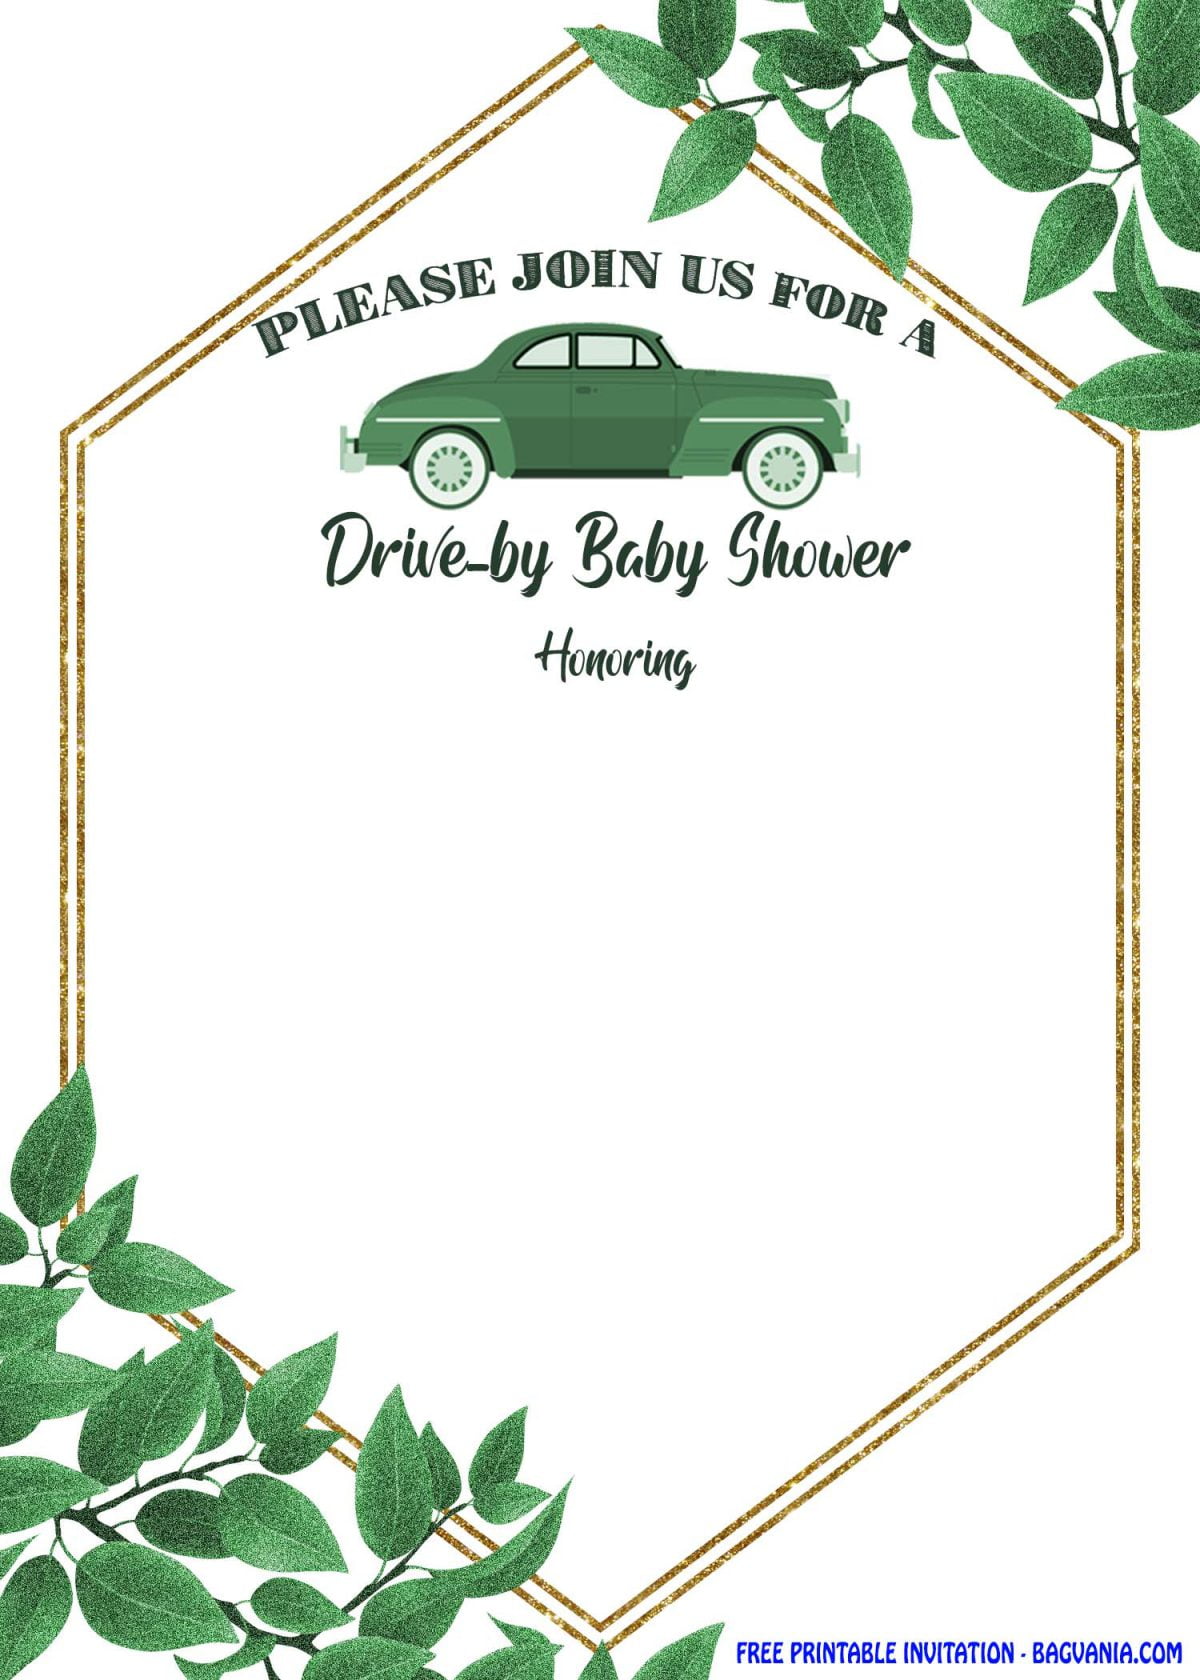 Free Printable Greenery Hexagonal Drive By Invitation Templates With Green Leaf